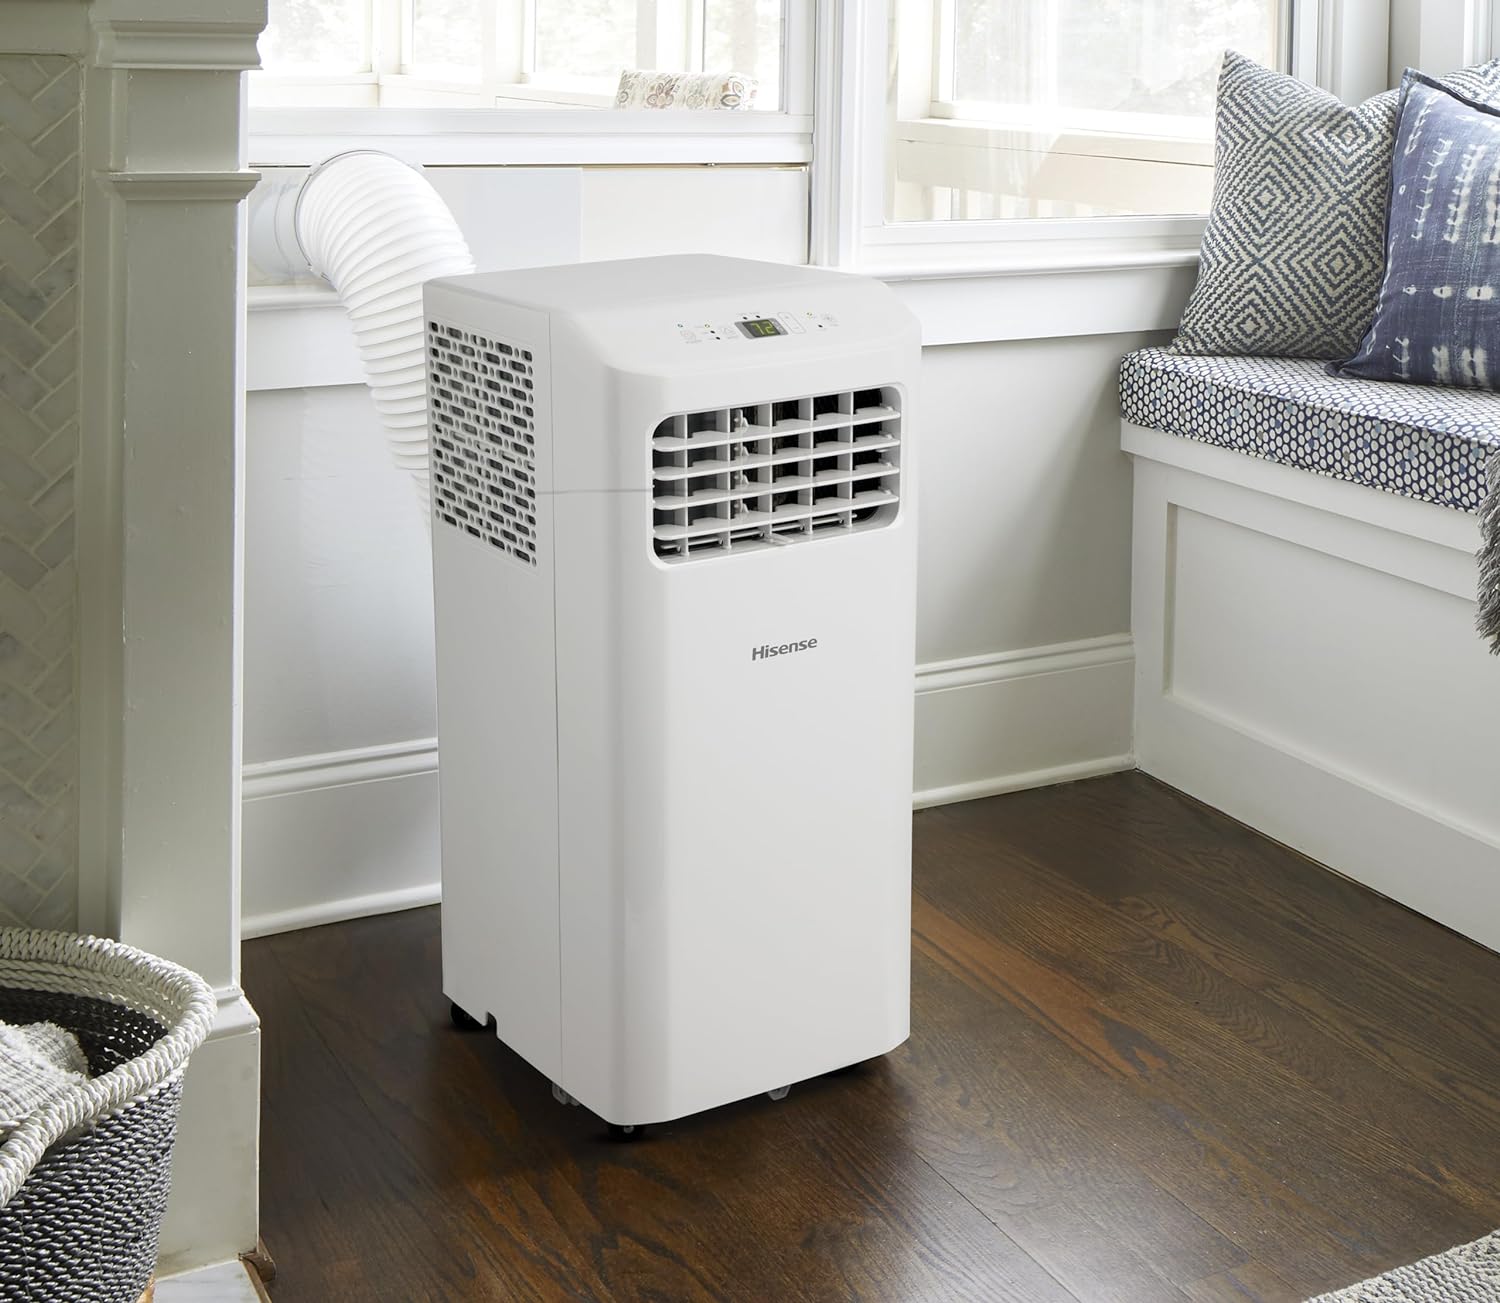 Hisense 150 sq.ft 5,000 BTU Cooling, Fan, Dehumidifier Portable Air Conditioner - Certified Refurbished